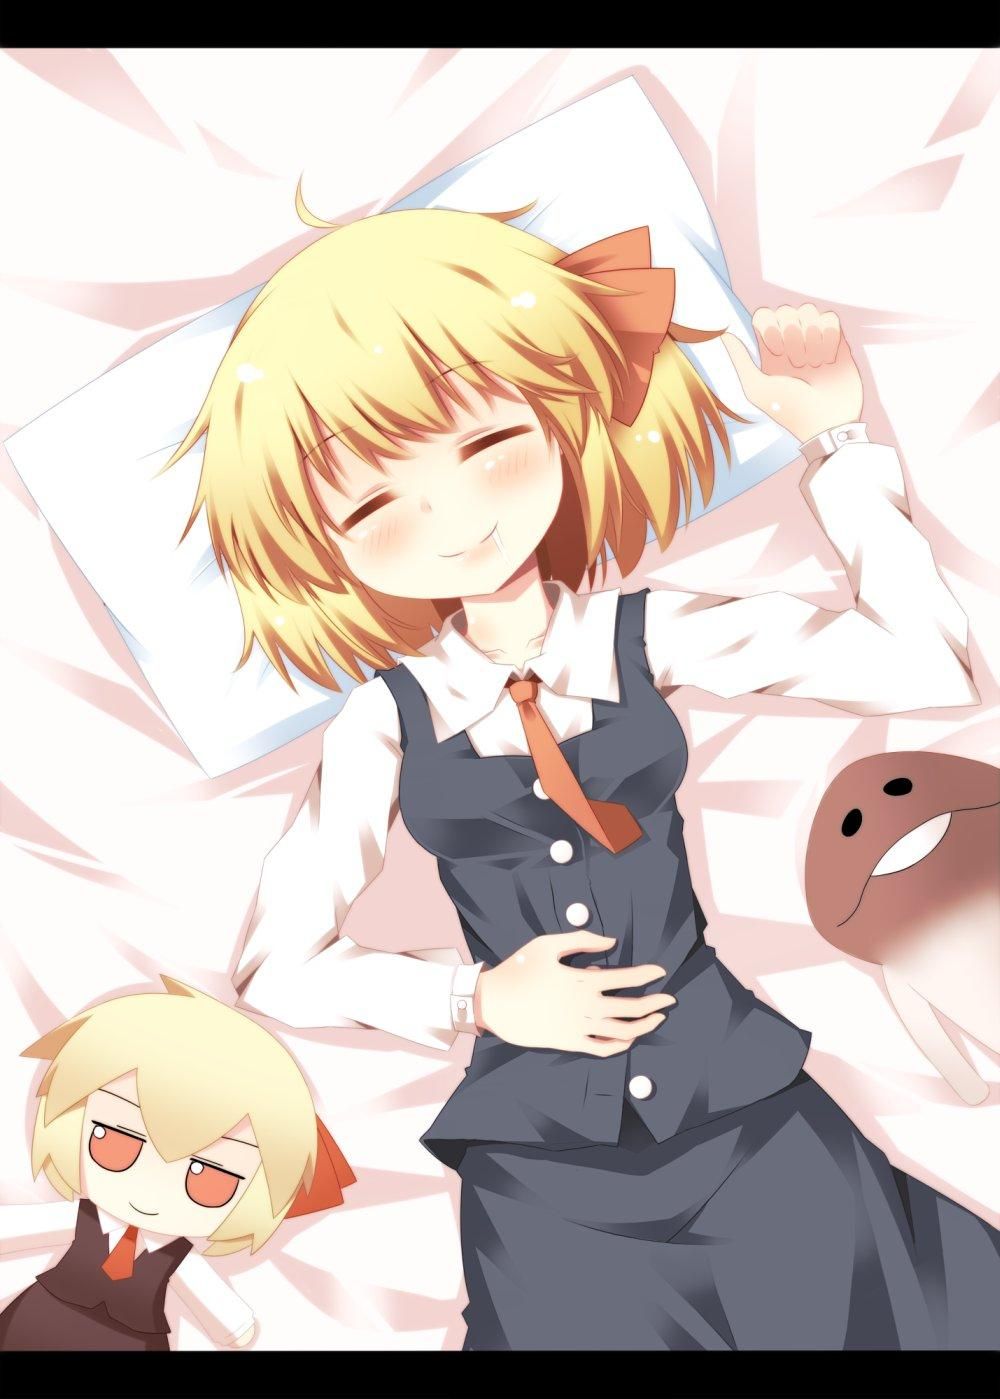 [Secondary] image be healed in the girl's cute sleeping face 27